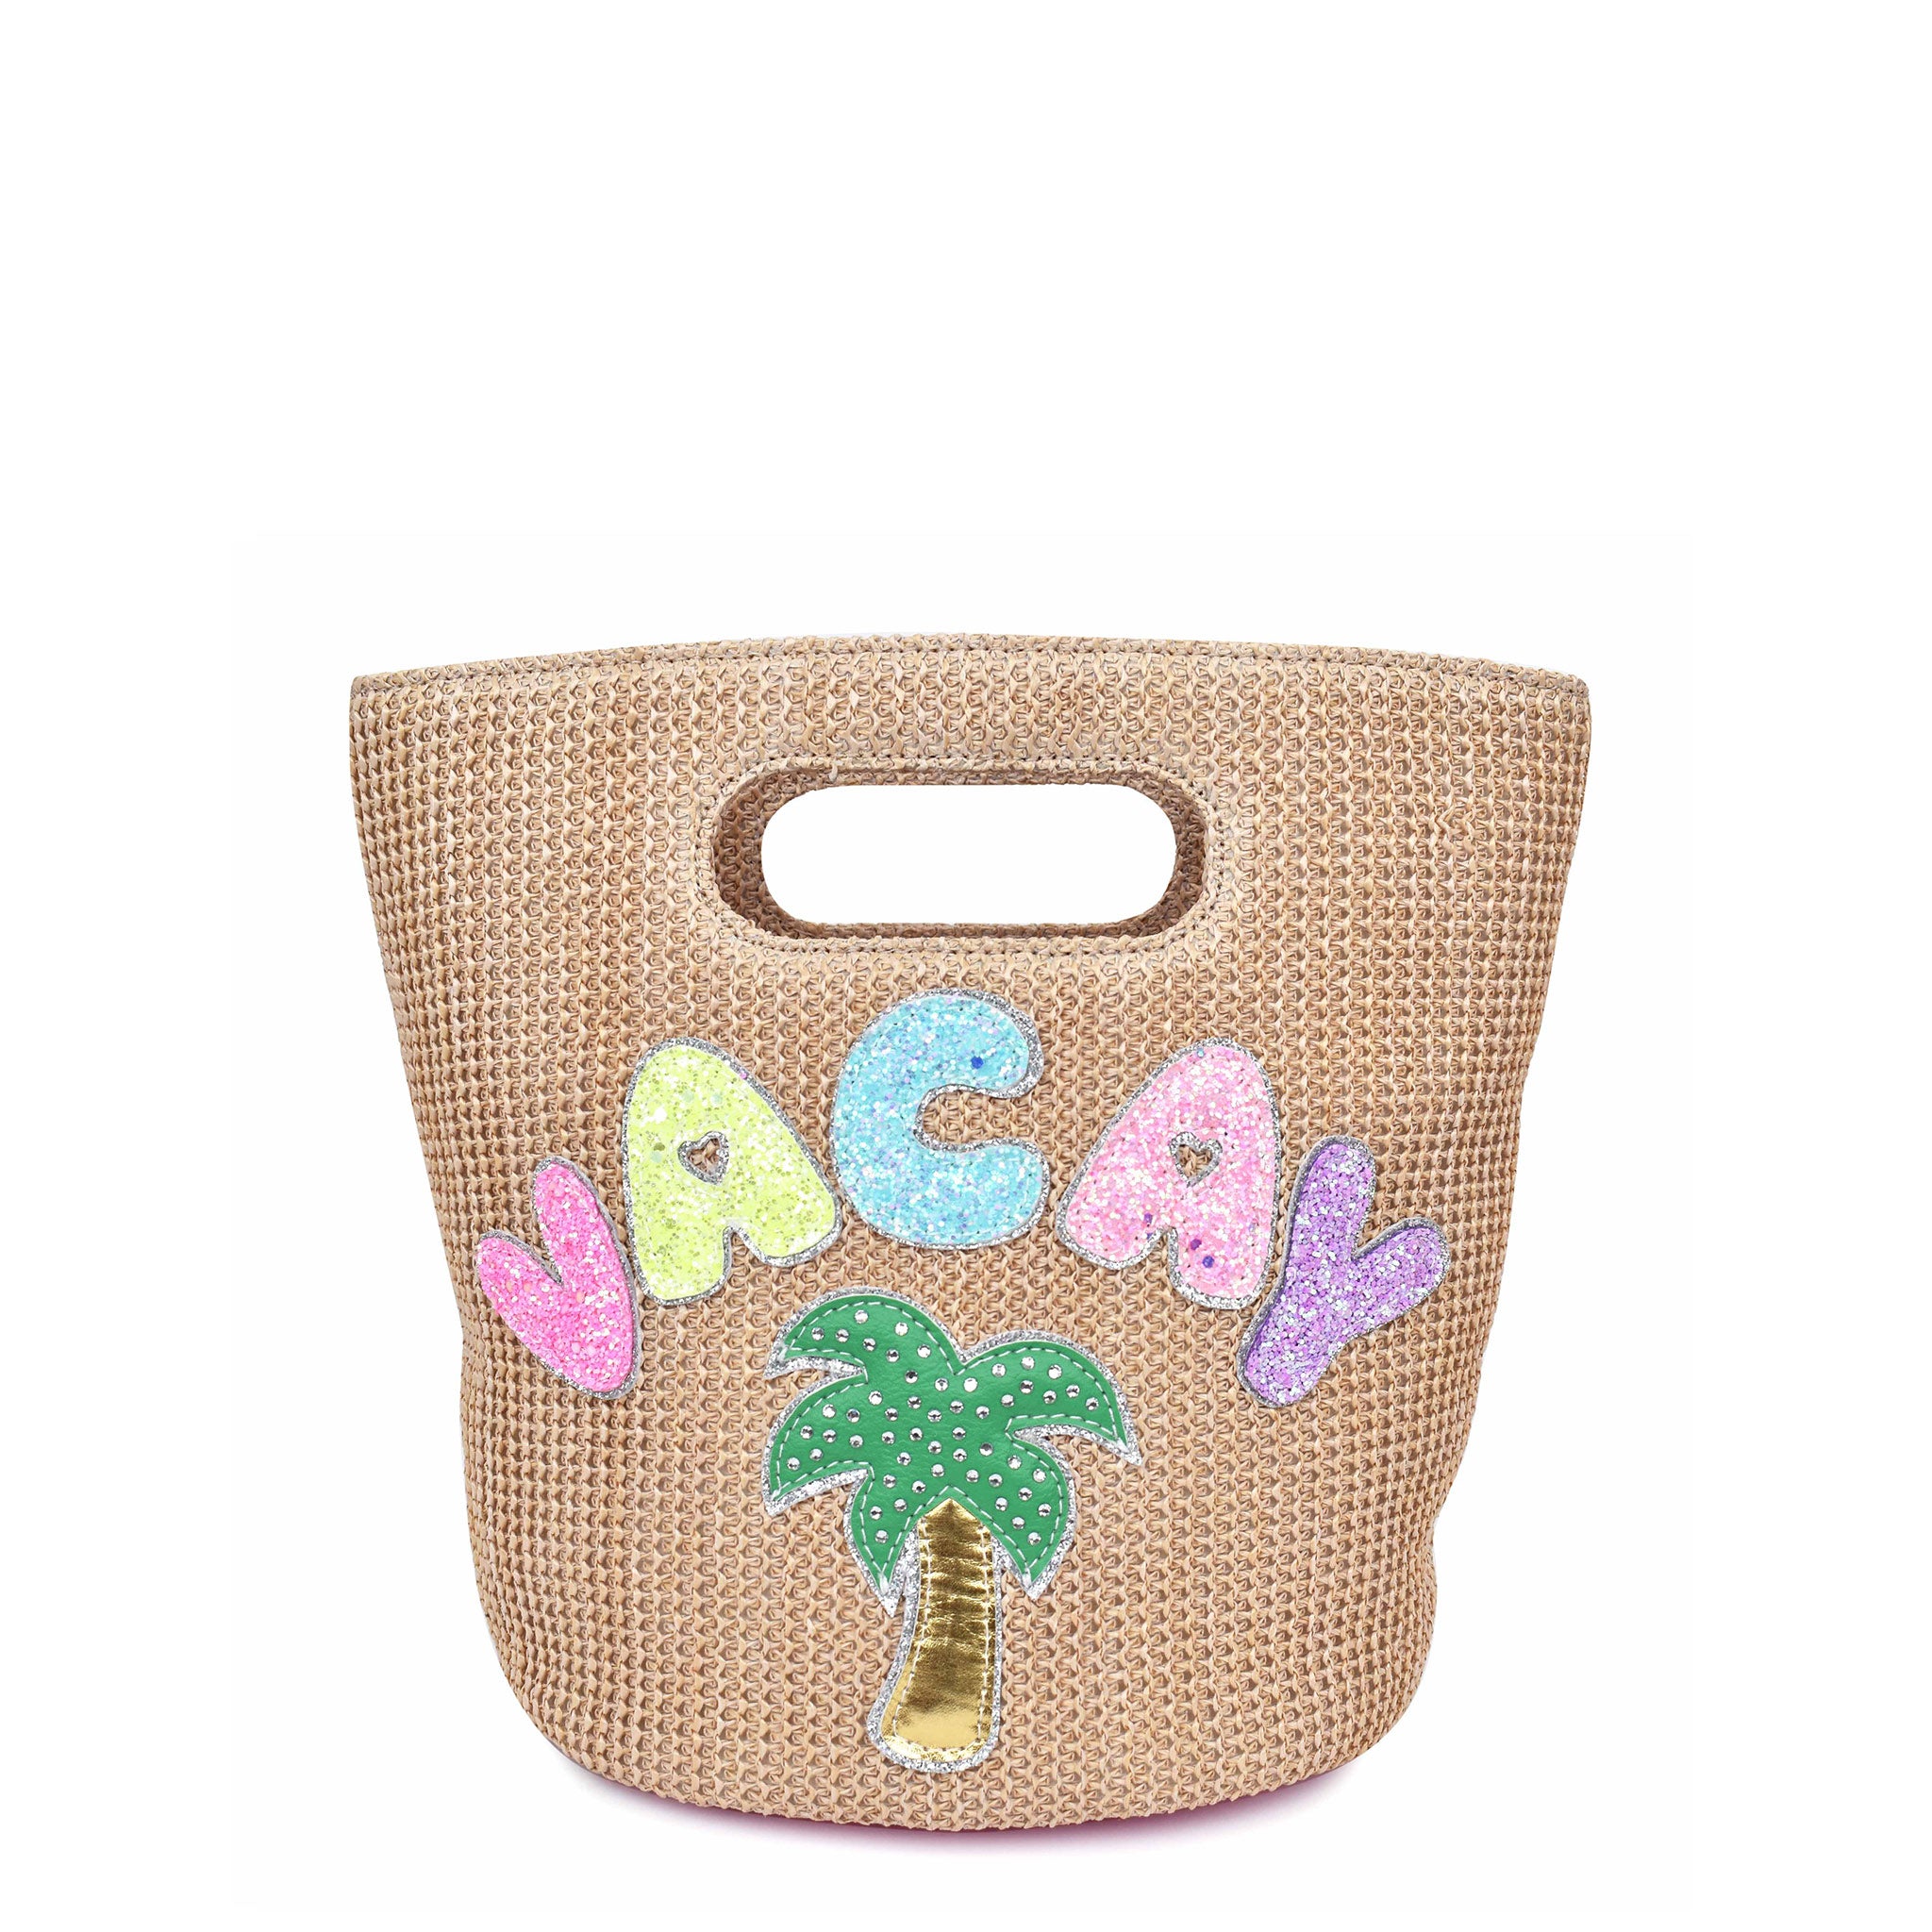 Front view of natural colored straw tote bag embellished with glitter bubble letters 'VACAY' and palm tree appliqués.